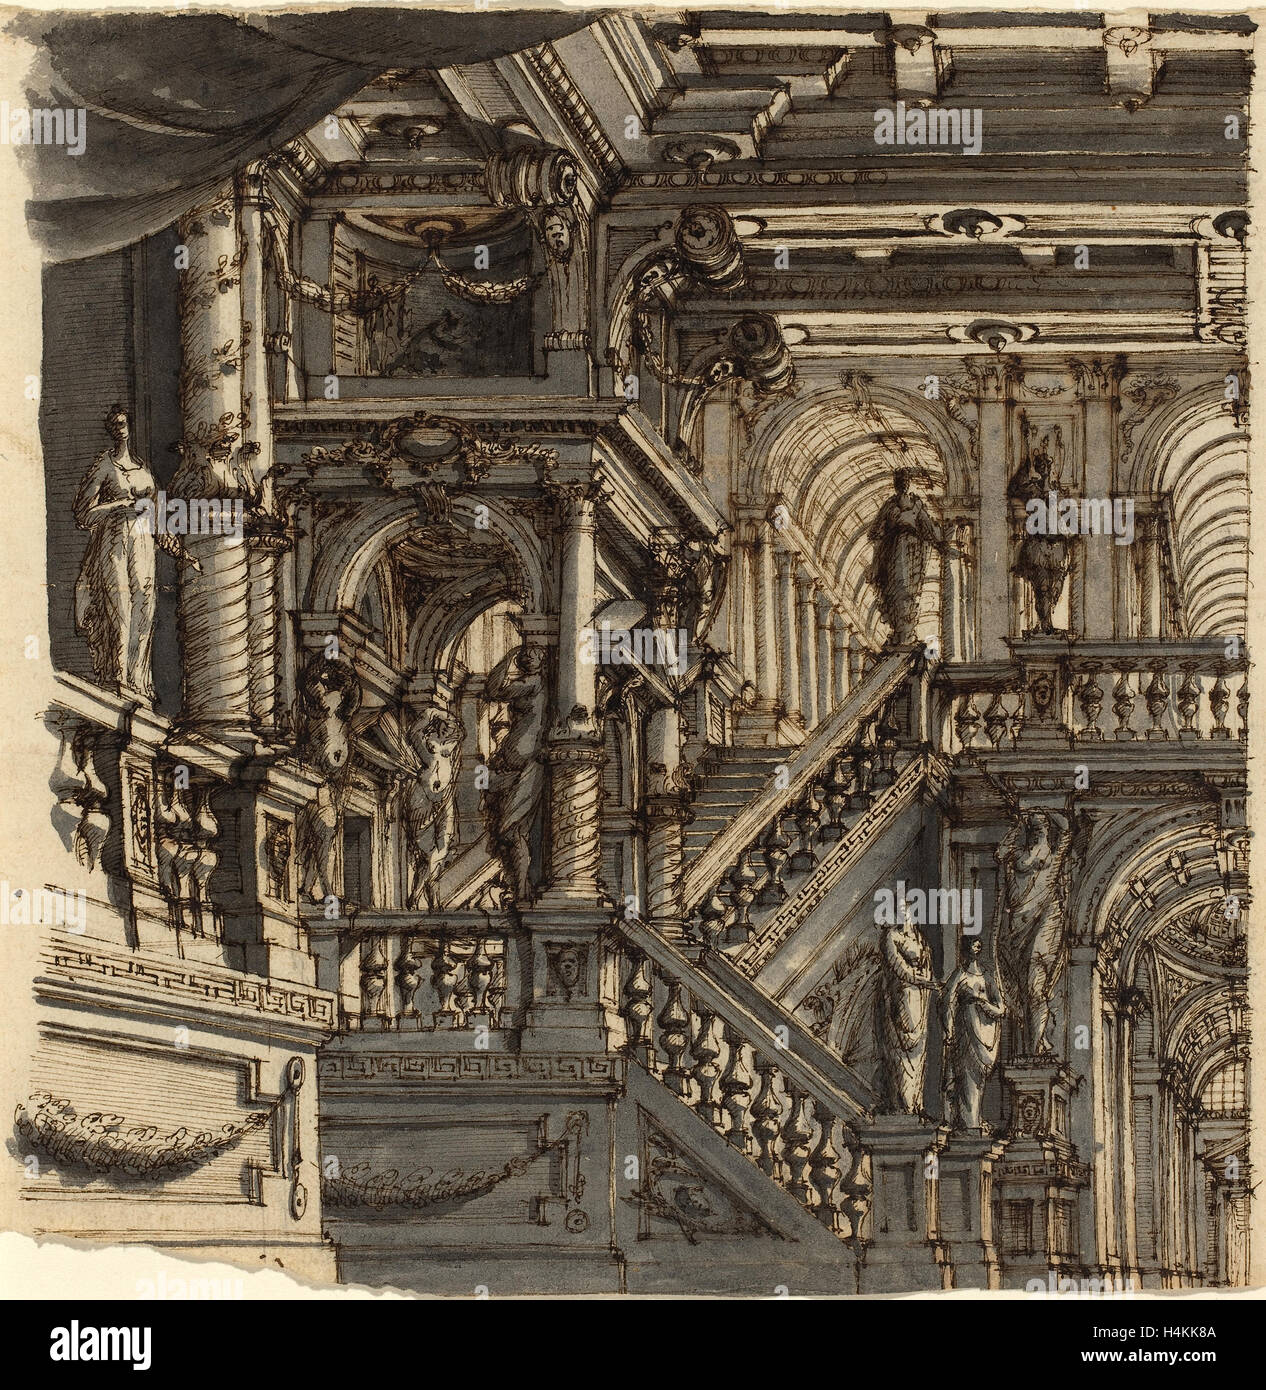 Bibiena (family member) (Italian, active 18th century), An Elaborate Staircase in a Palace, pen and brown ink with gray wash Stock Photo